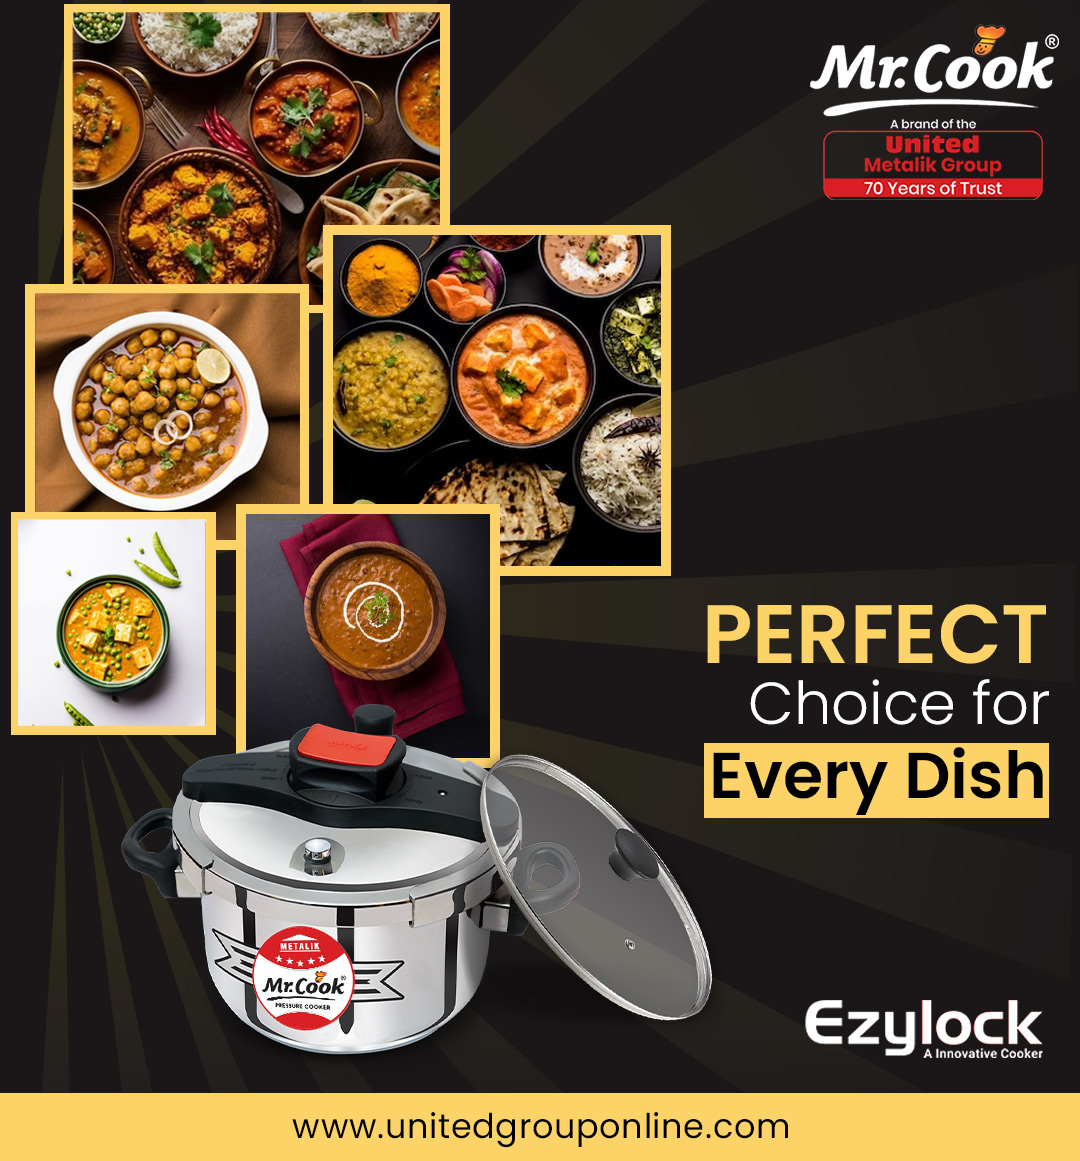 Perfect Choice For Every Dish...
.
.
.
#mrcook #Cookers #Cookware #PressureCookers #silky #unirize #eliteplust #Ezylock #HealthyCooking #stainlesssteel
#Durable #Reliable #PremiumQuality #Tastyfood #Chefchoice
#Qualityproduct #Customersatisfaction